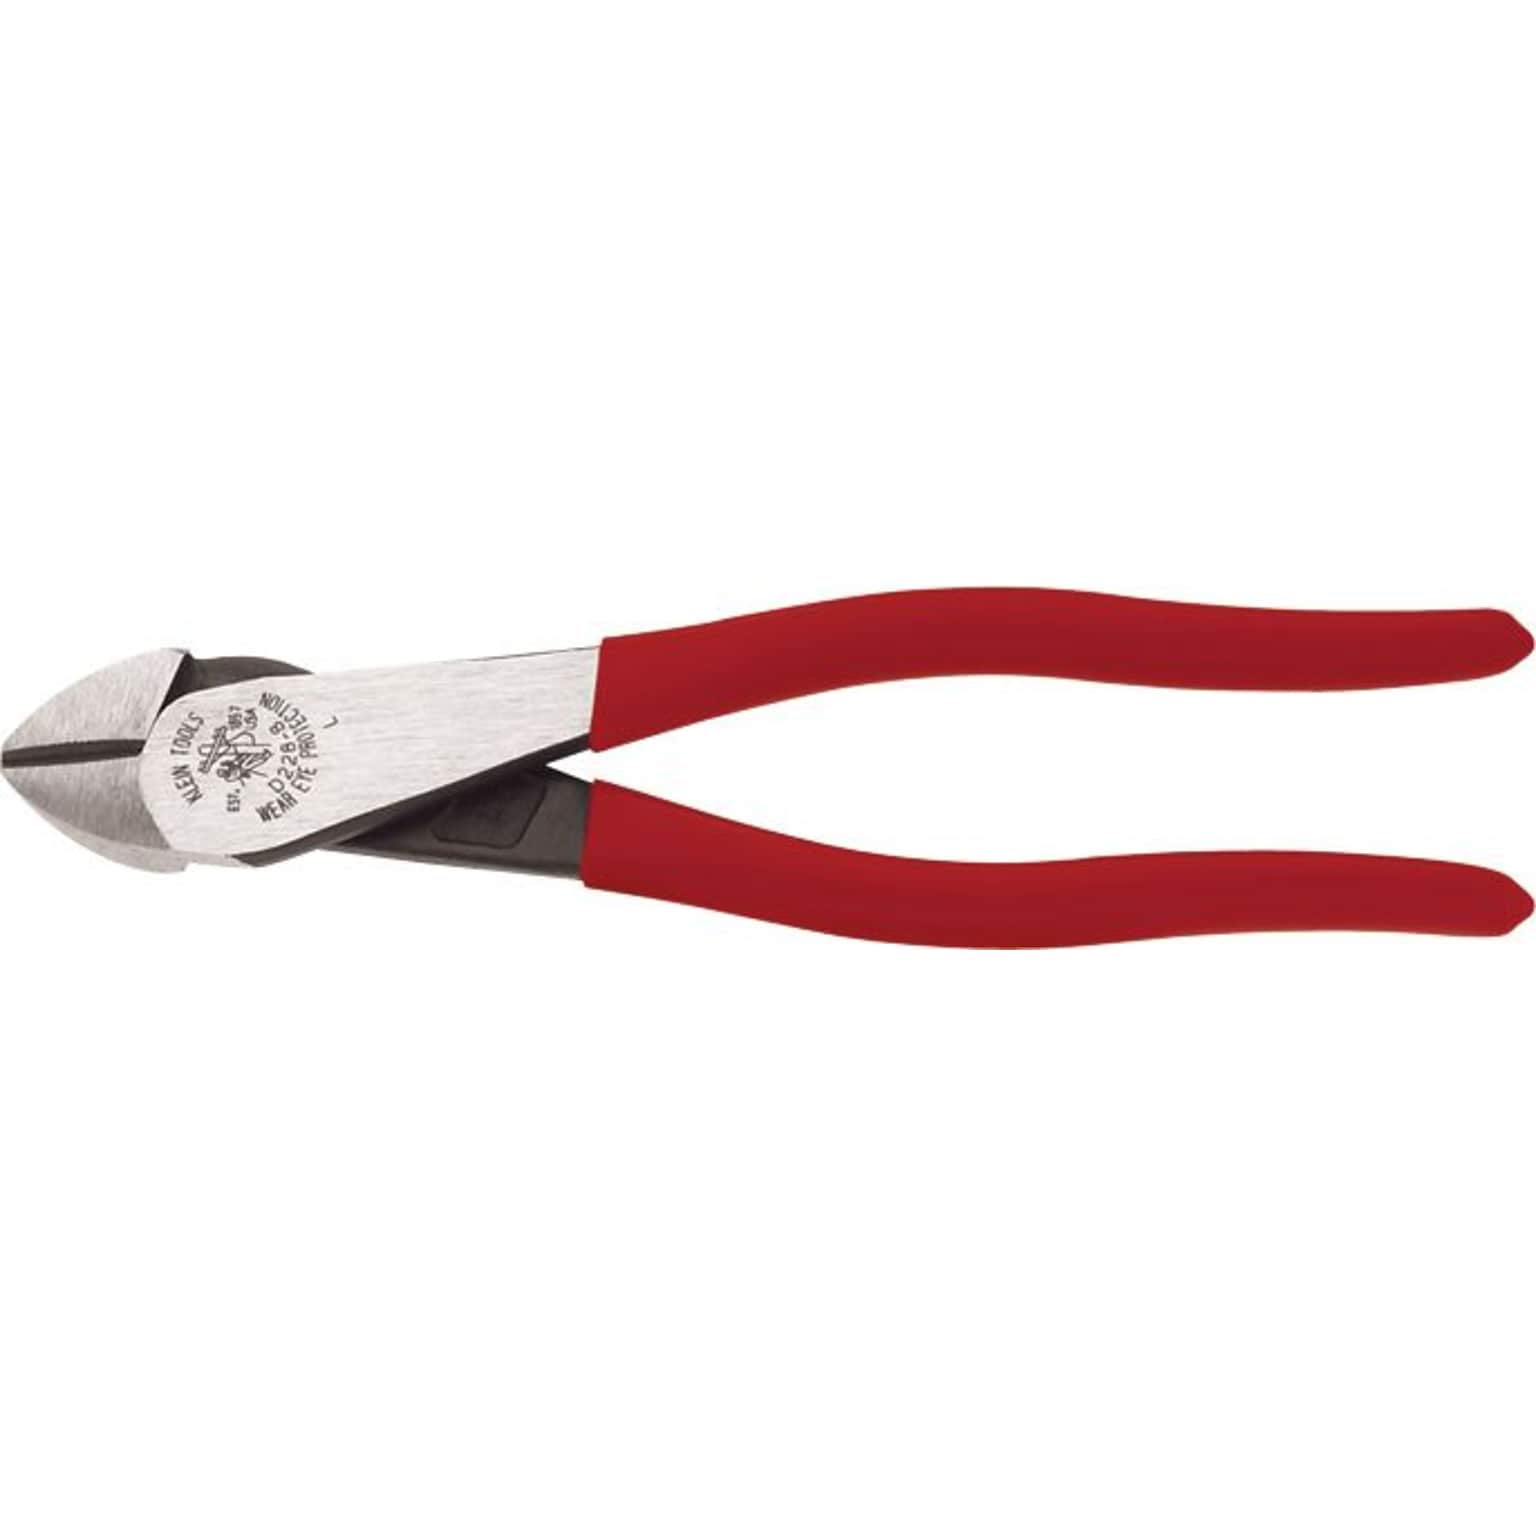 Klein Tools® High-Leverage Diagonal Cutter Pliers, Red Handle, 8